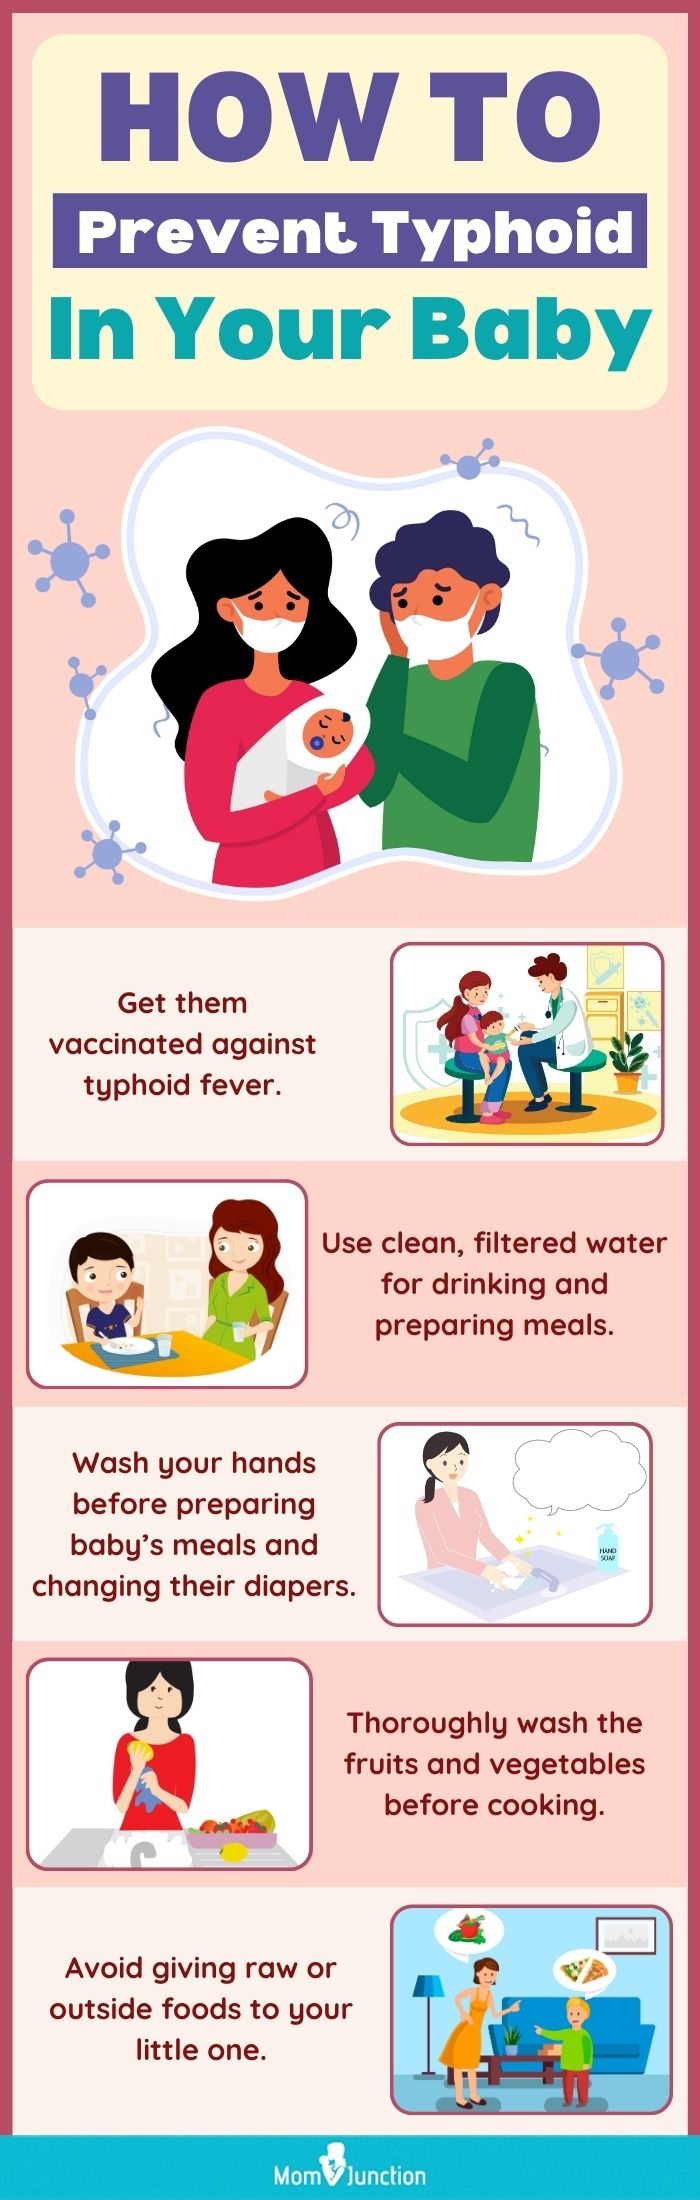 typhoid fever symptoms in adults